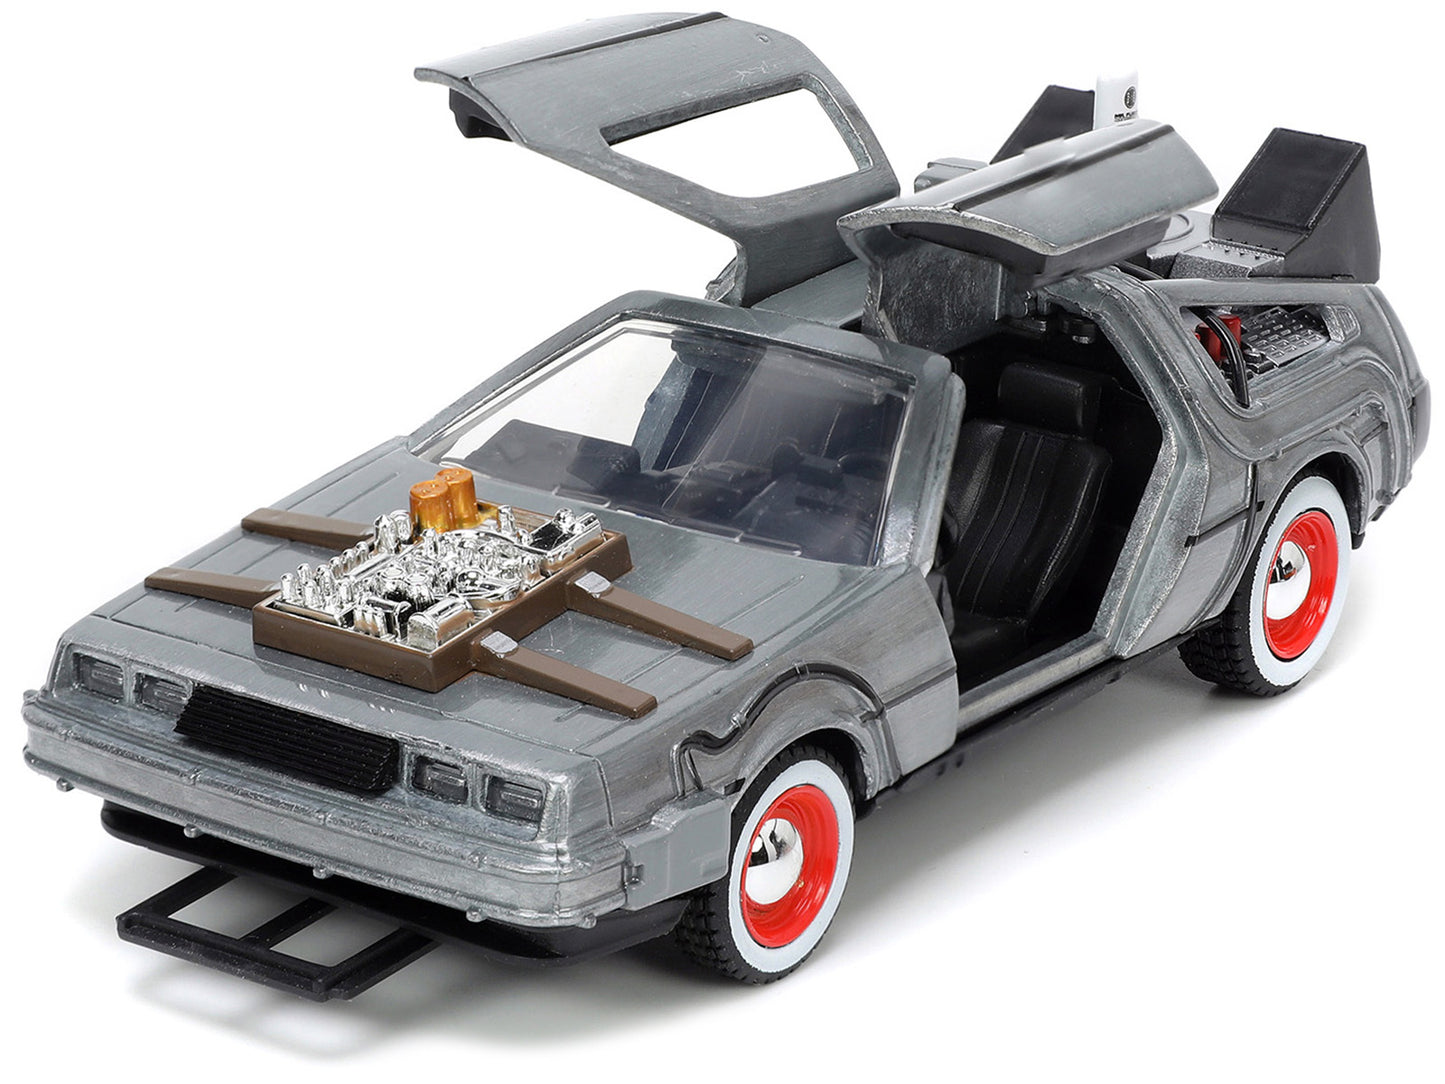 DeLorean DMC (Time Machine) Brushed Metal "Back to the Future Part III" (1990) Movie "Hollywood Rides" Series 1/32 Diecast Model Car by Jada